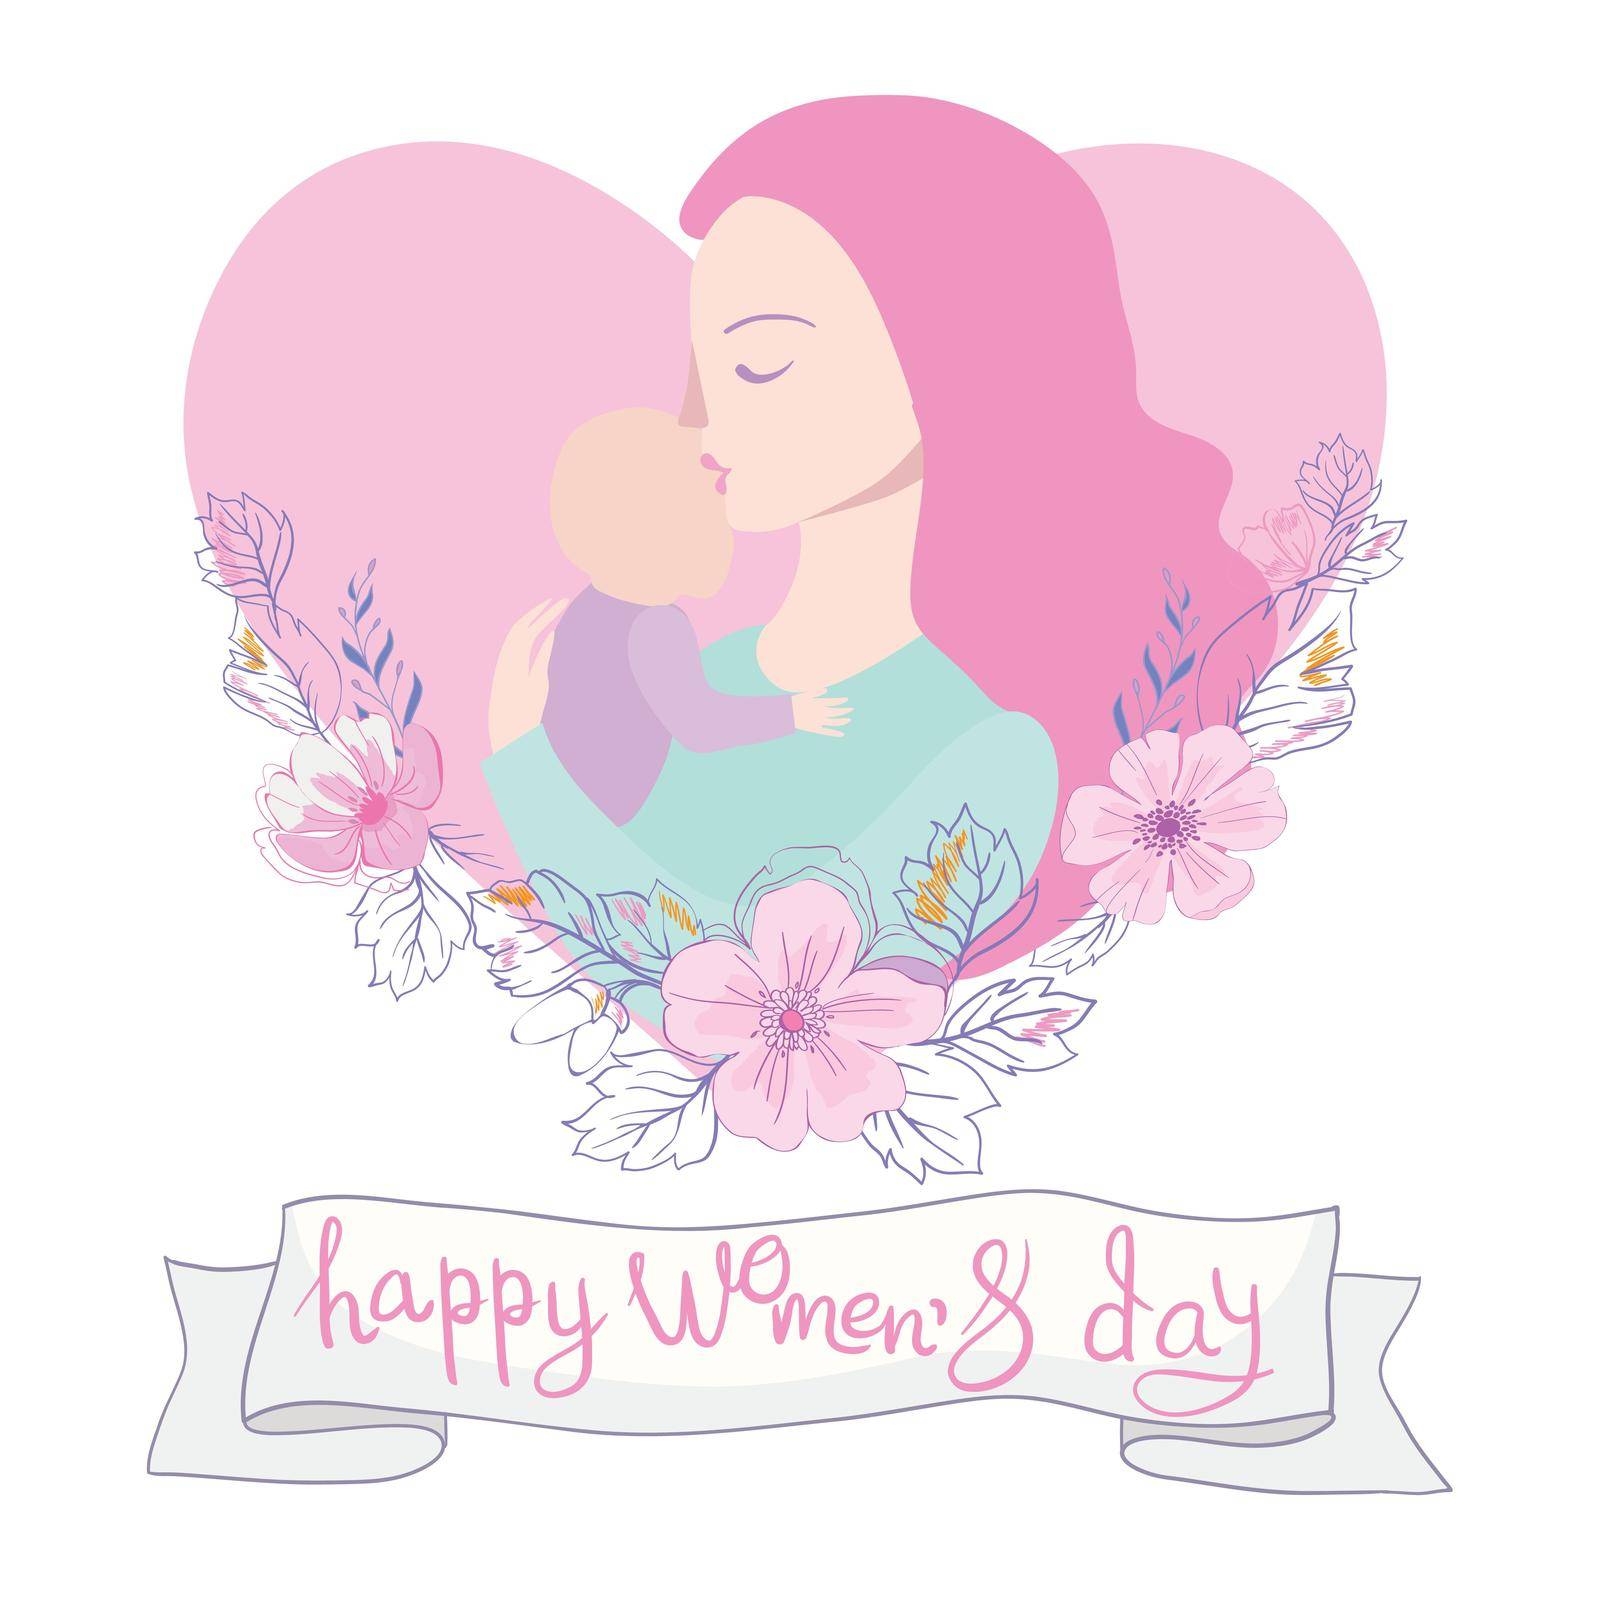 Mother holding her cute baby child vector flat illustration with flower botanical leaf ornament background by Vladimir90